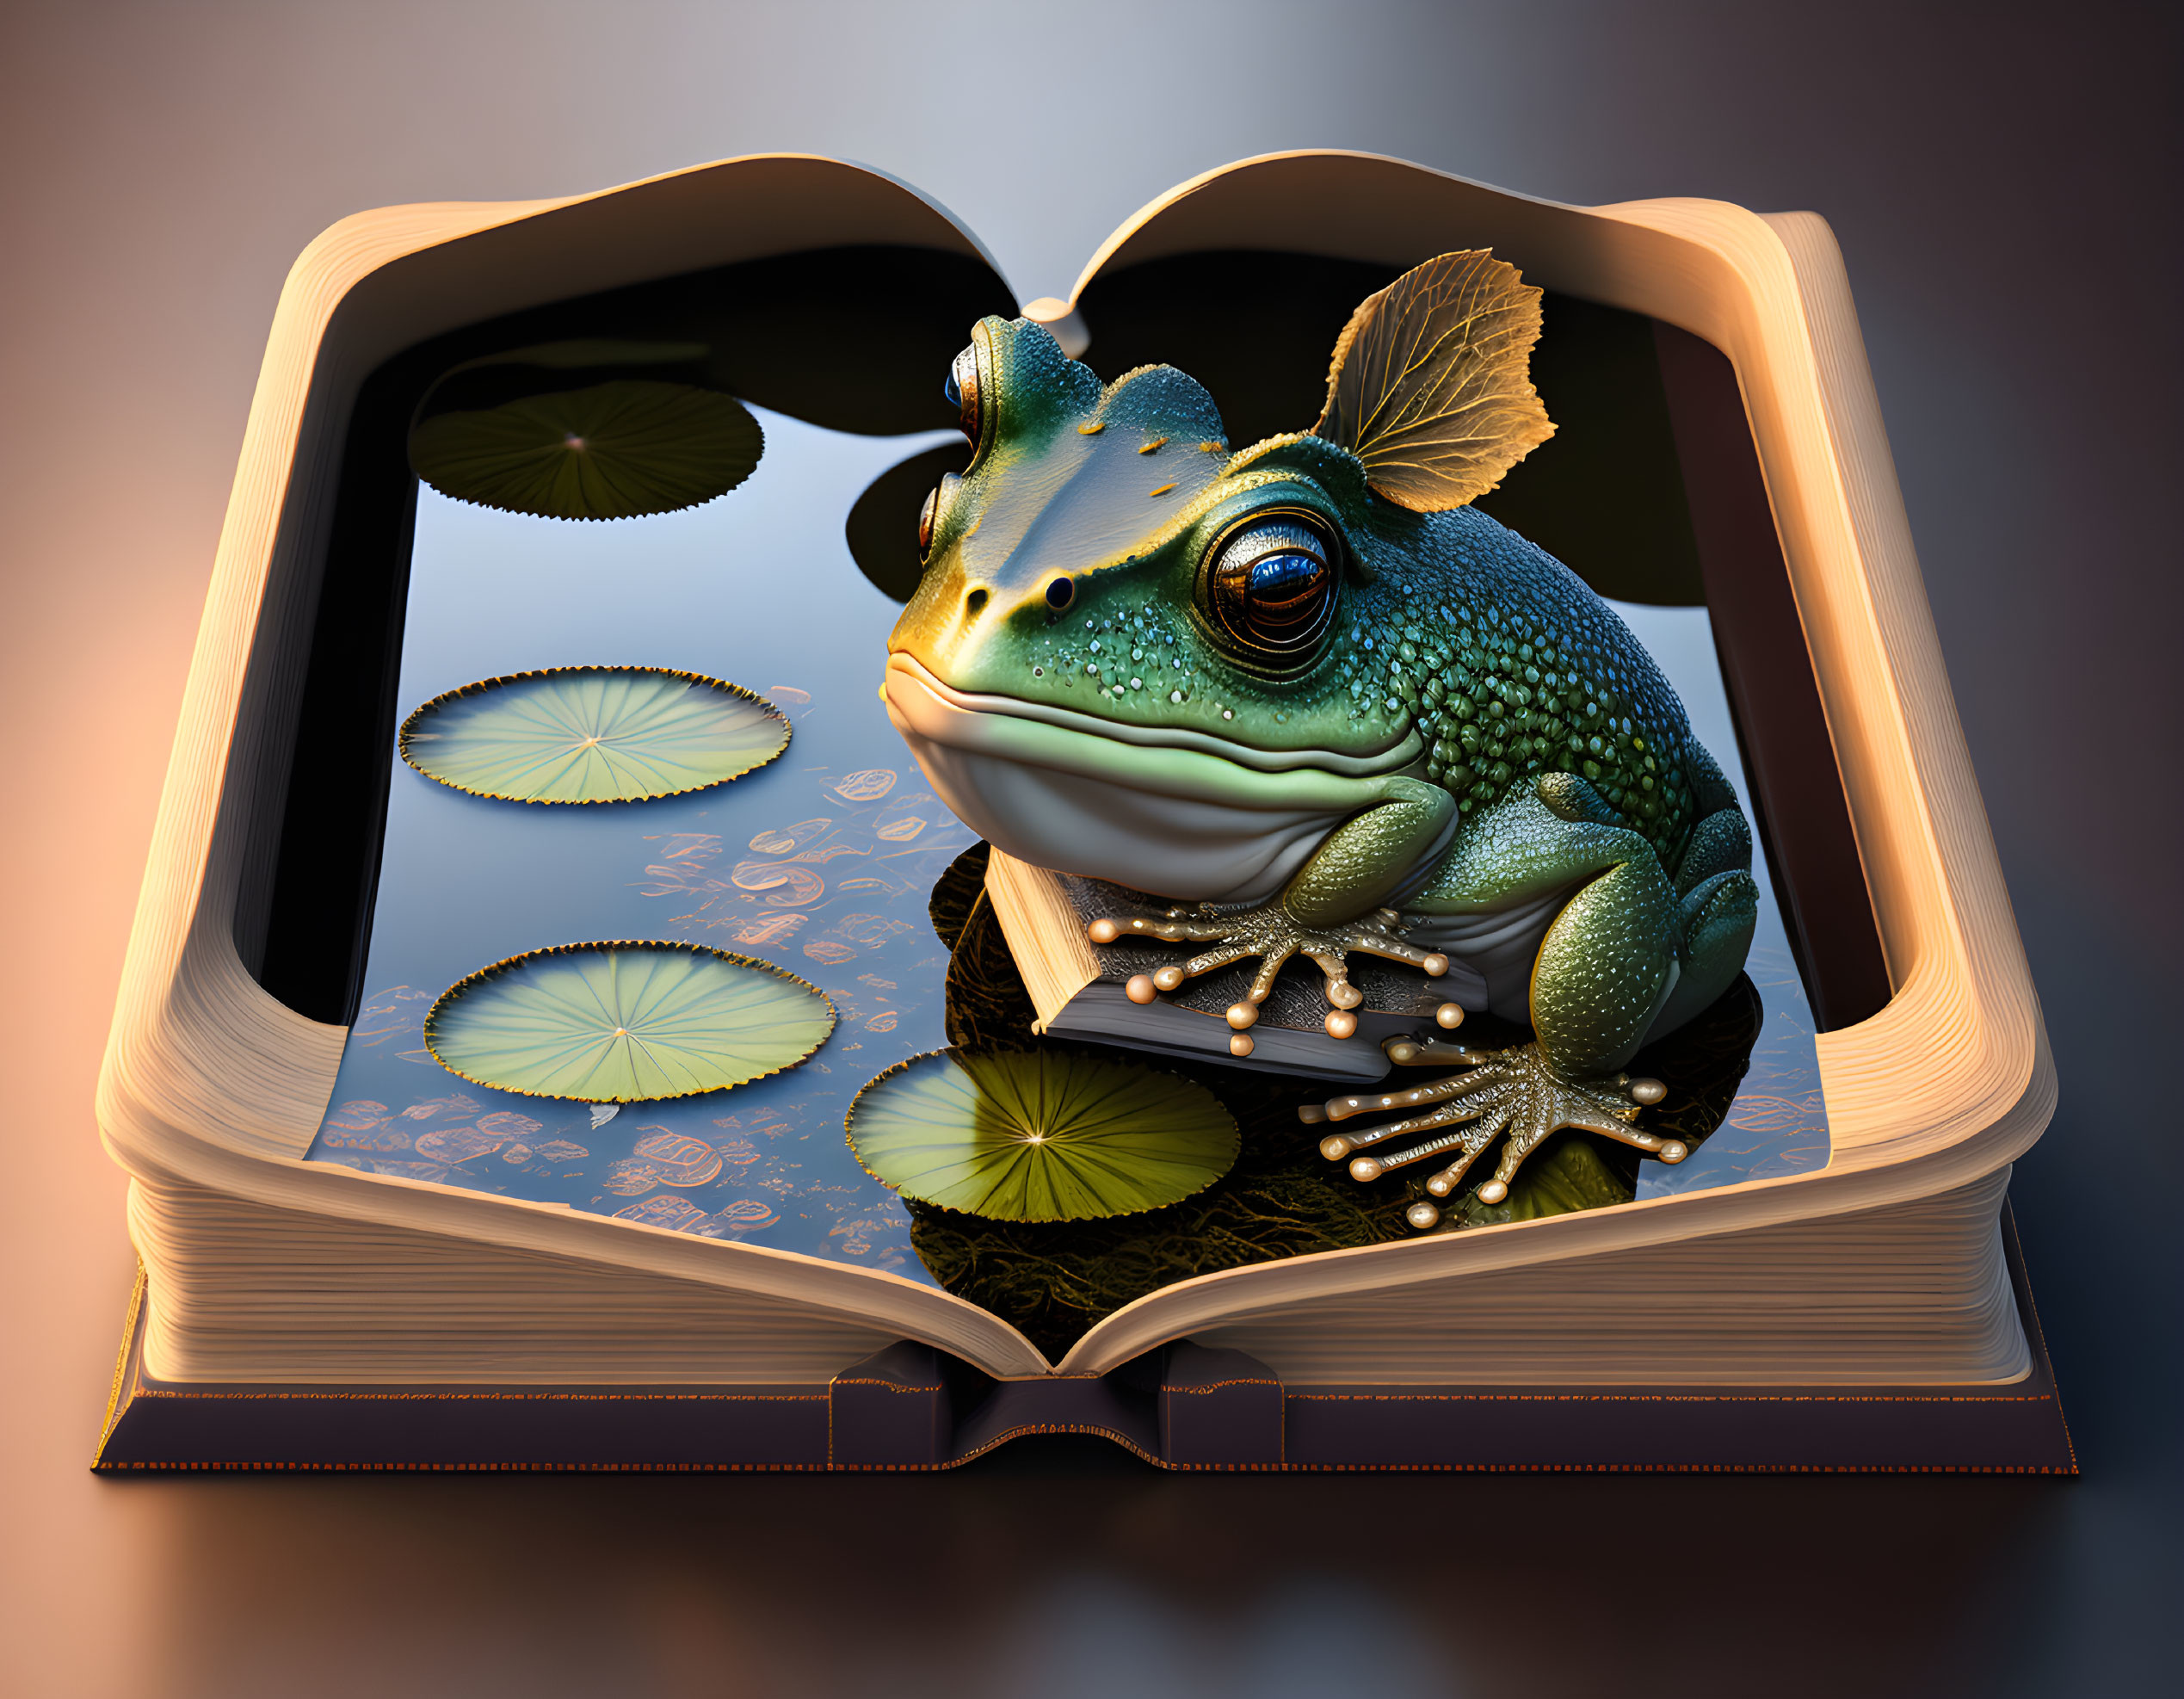 Frog in a book on a book